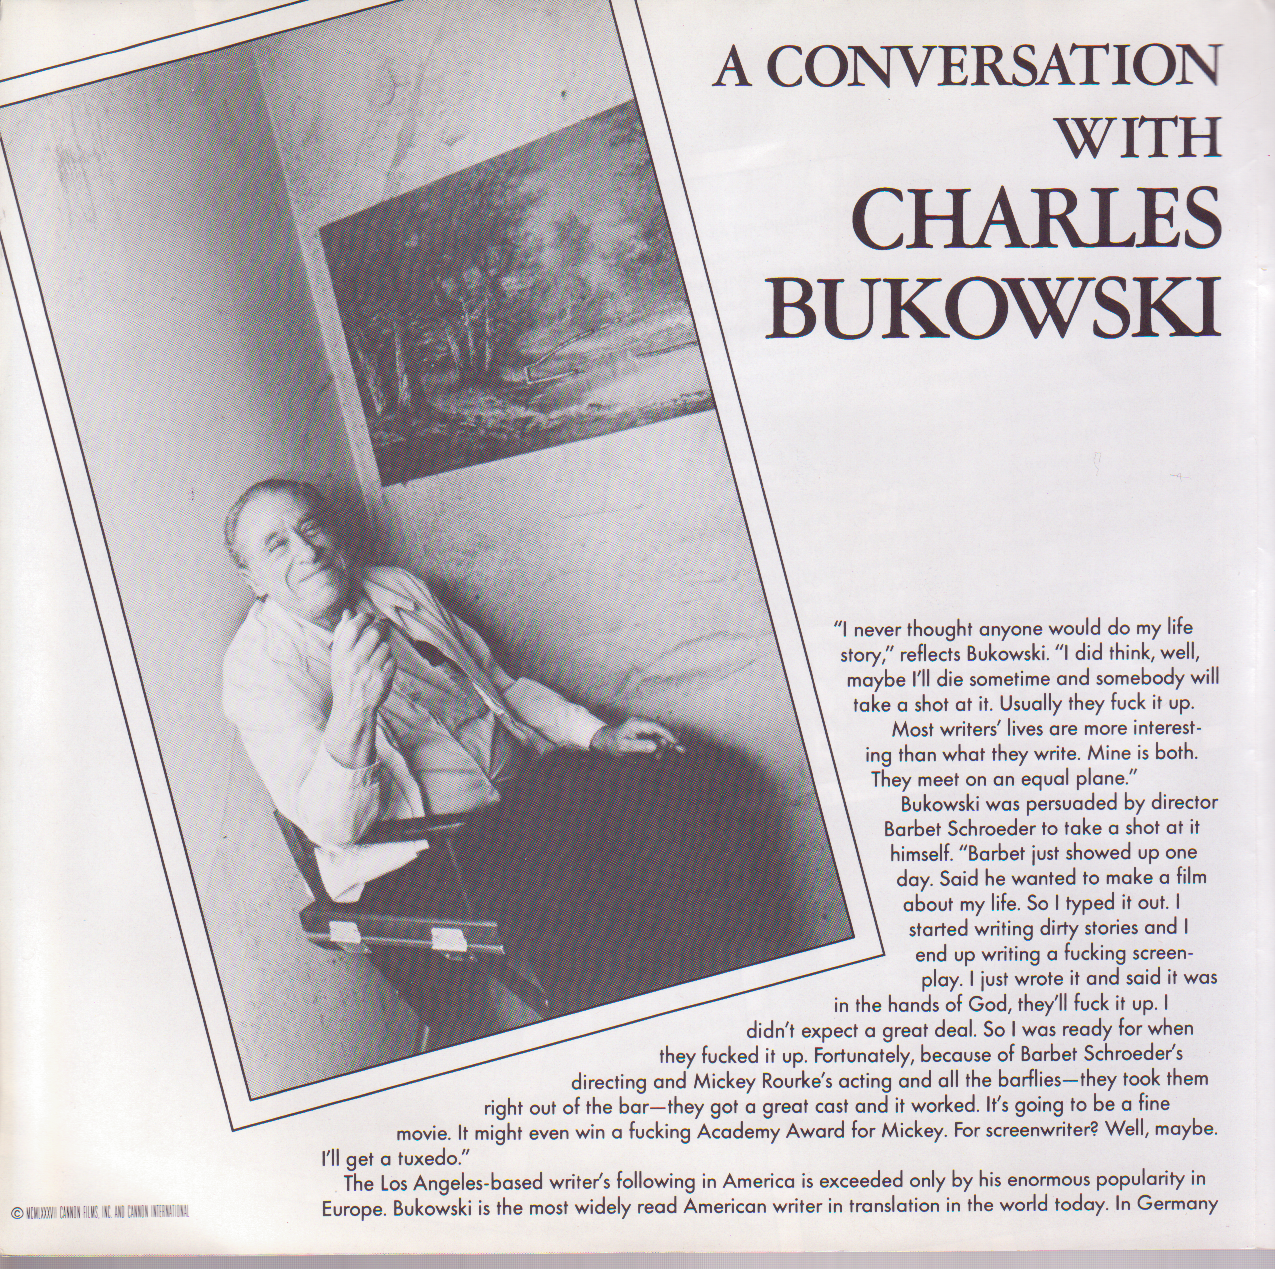 Official Barfly Promo Booklet with Charles Bukowski Interview (1987)